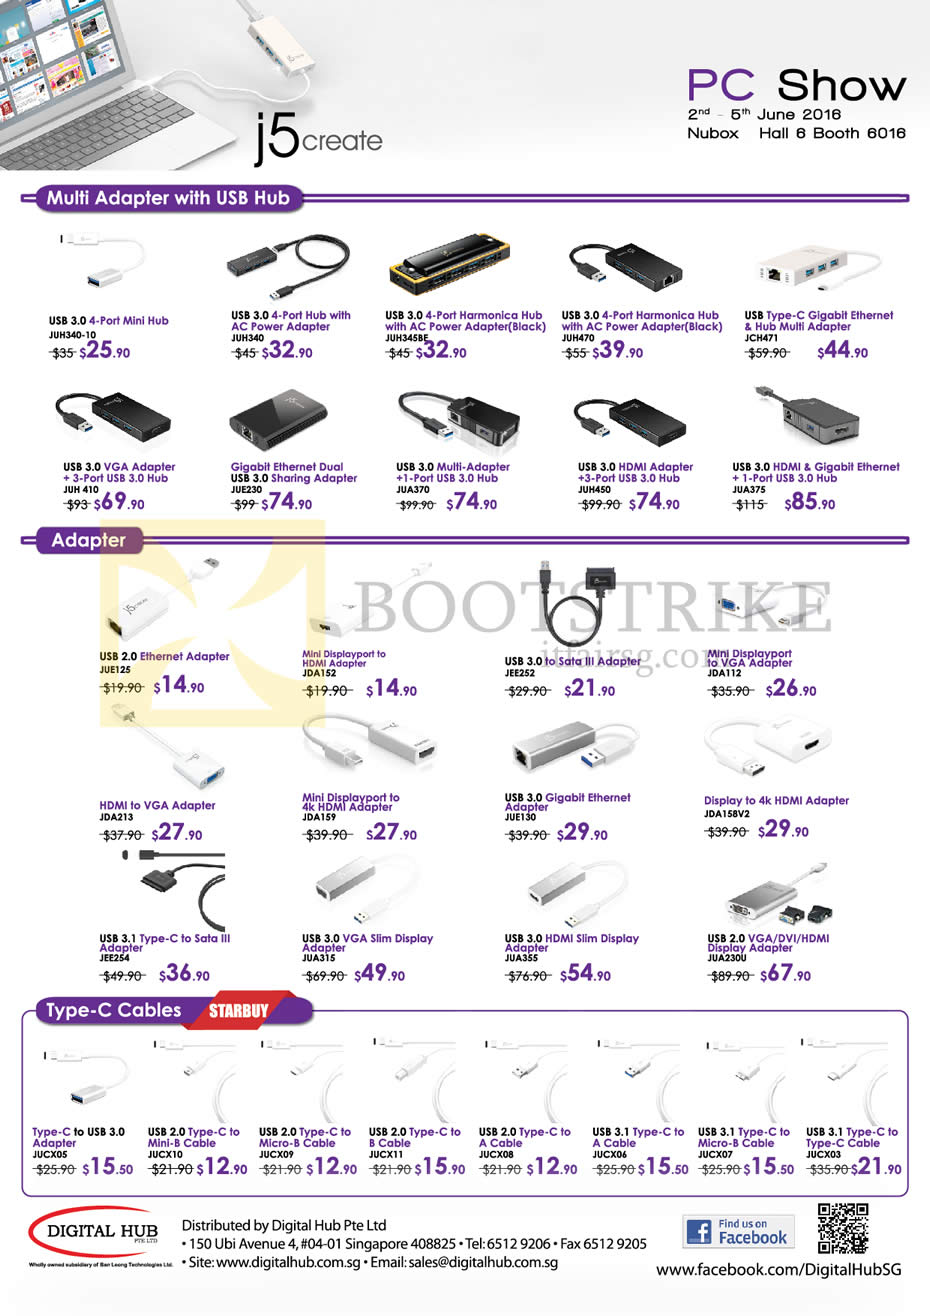 PC SHOW 2016 price list image brochure of Nubox J5 Create Accessories, Adapters, USB Hub, Type-C Cables